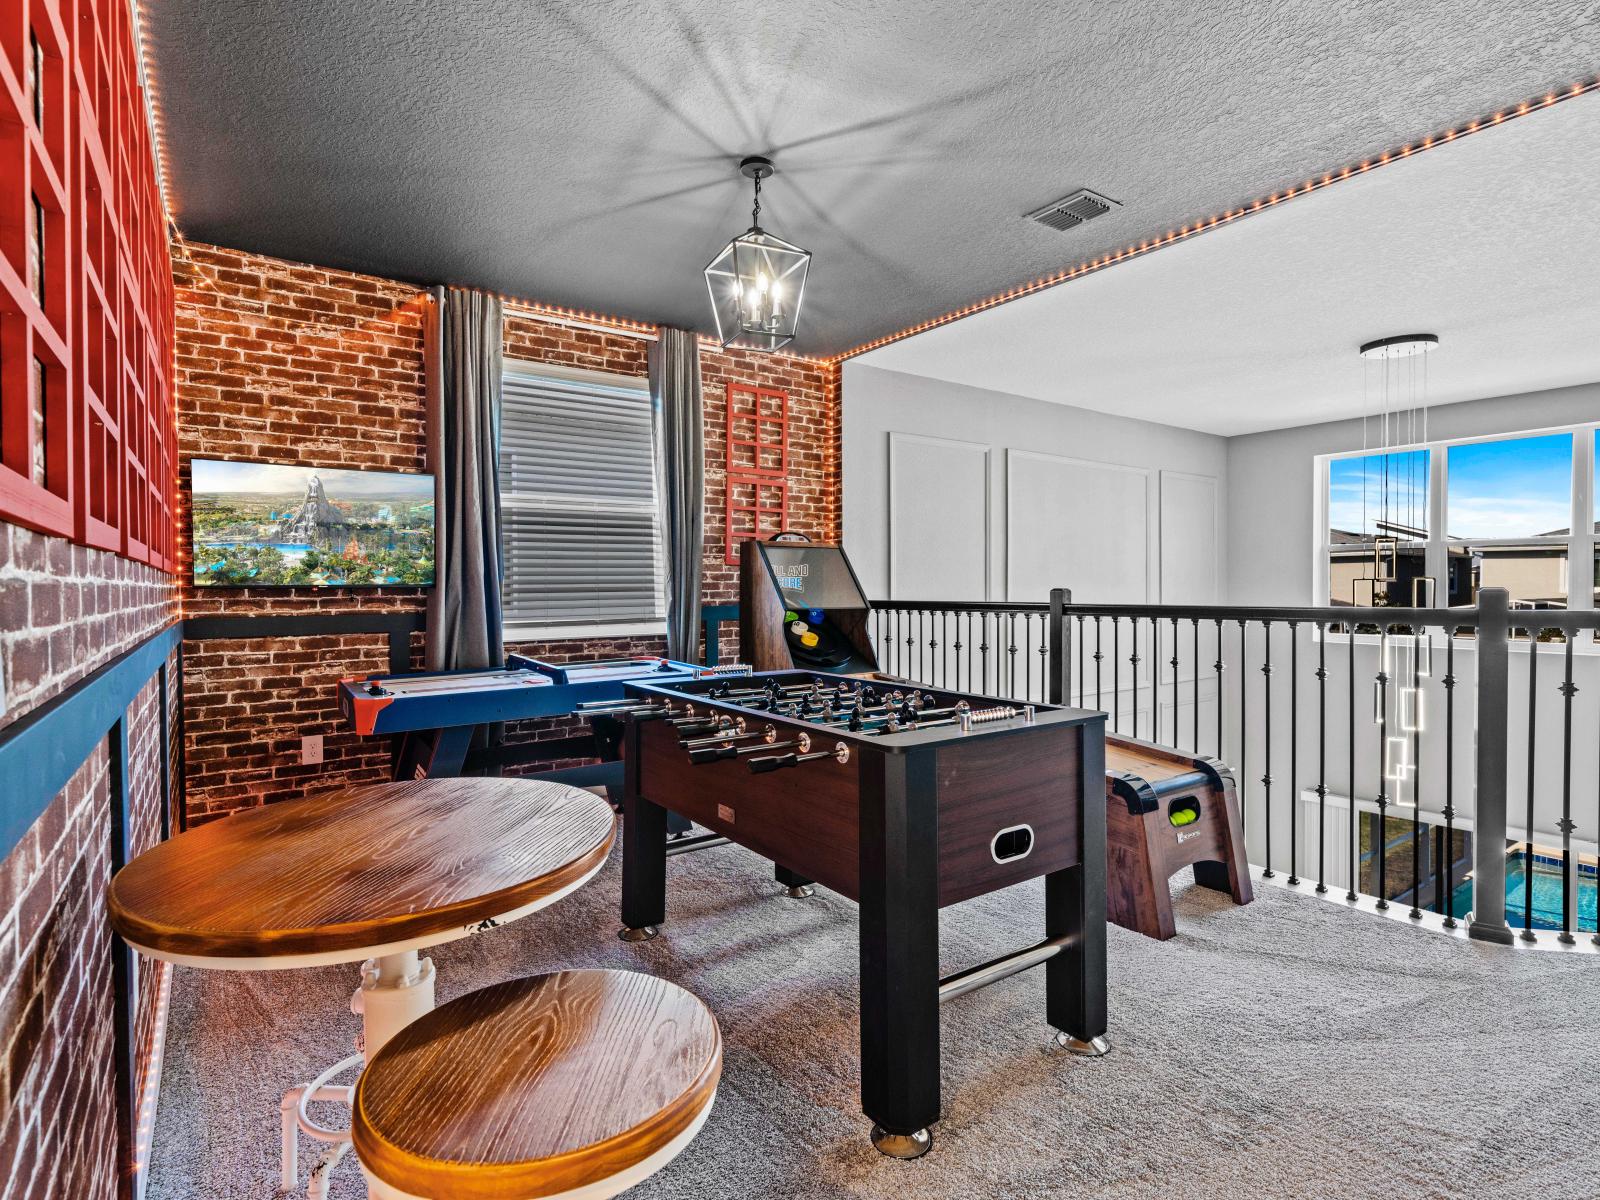 Game Area of the of the Home in Davenport Florida - Immerse yourself in the excitement of game area - Gaming tables awaits - Perfect blend of leisure and competition